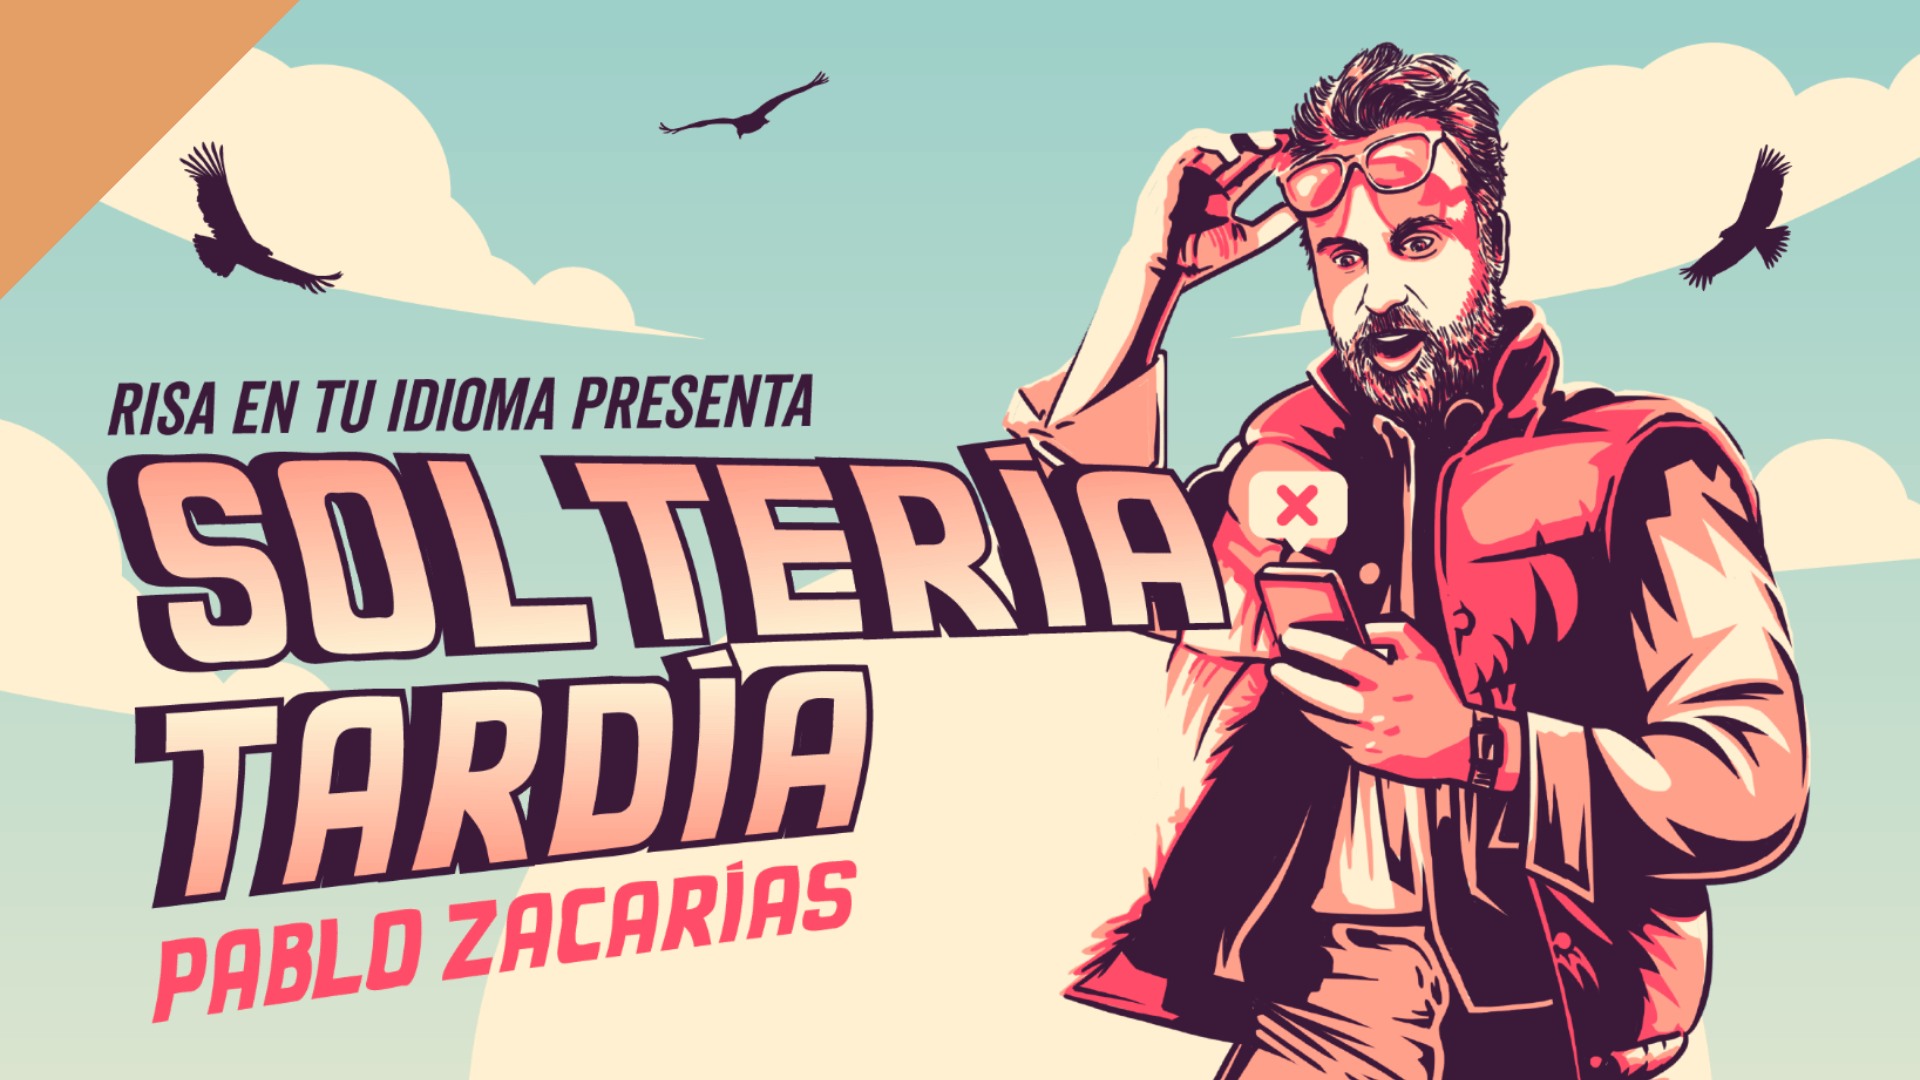 A banner image featuring Mexican comedian, Pablo Zacarías, wearing sunglasses and getting rejected on a dating app. The banner image reads: "Risa en tu Idioma Presenta Solteria Tardia", with a light orange corner bookmark, categorizing this show as Rentals.